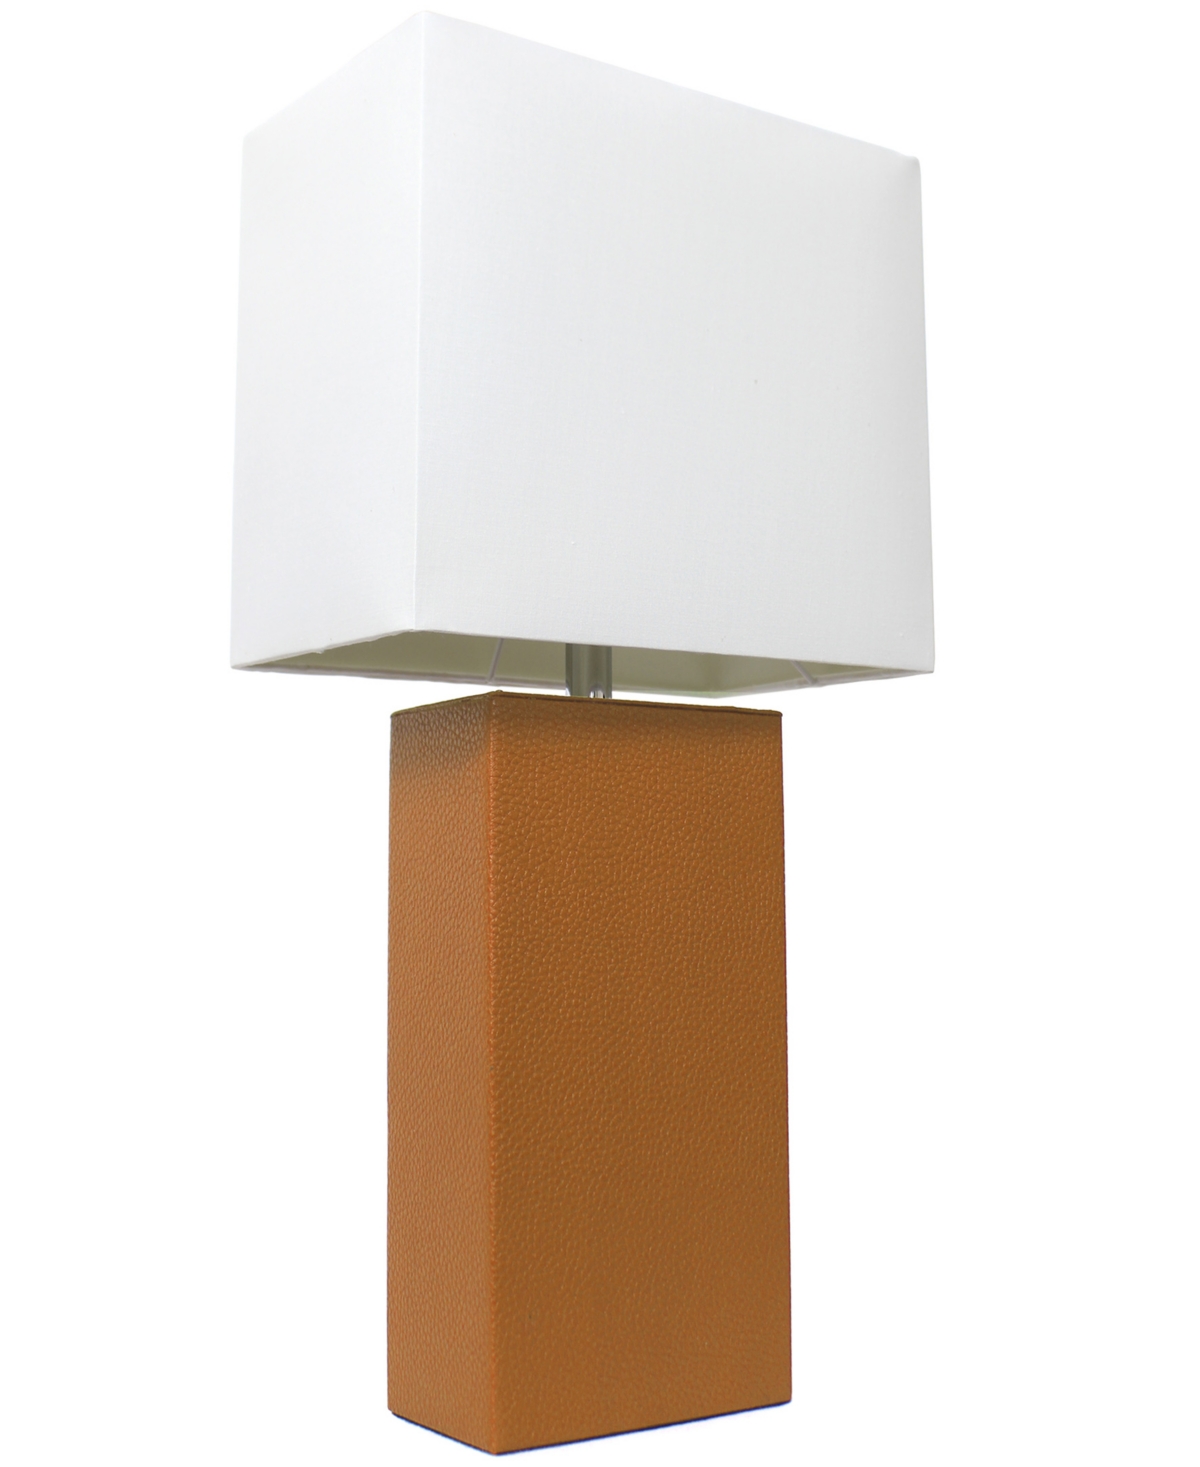 All The Rages Lalia Home Lexington 21" Leather Base Modern Home Decor Bedside Table Lamp With White Rectangular Fa In Tan